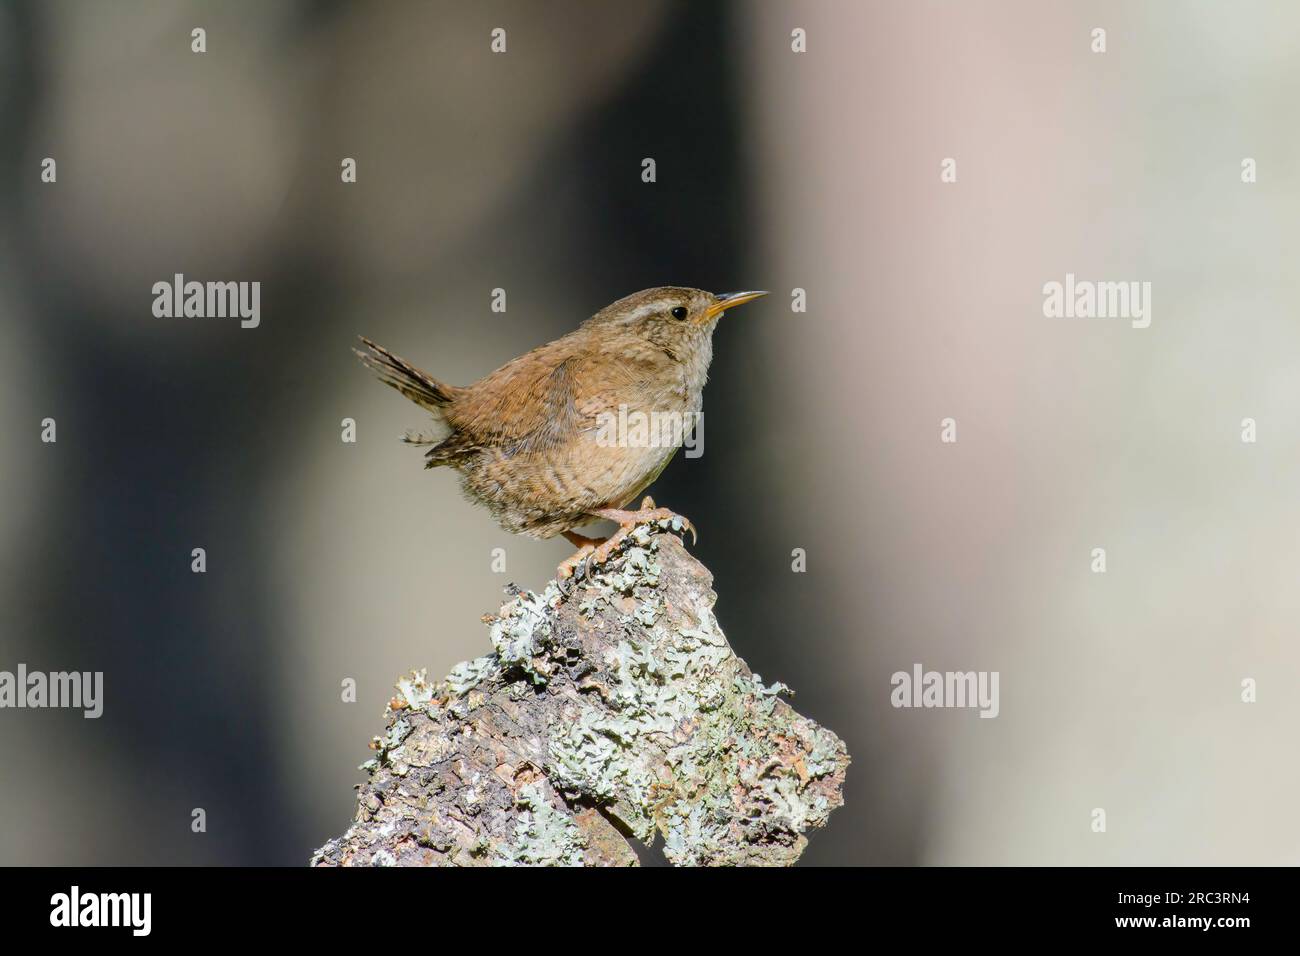 Eurasian Wren, Toglodytes troglodytes, perched on a lichen covered tree stump, looking right Stock Photo